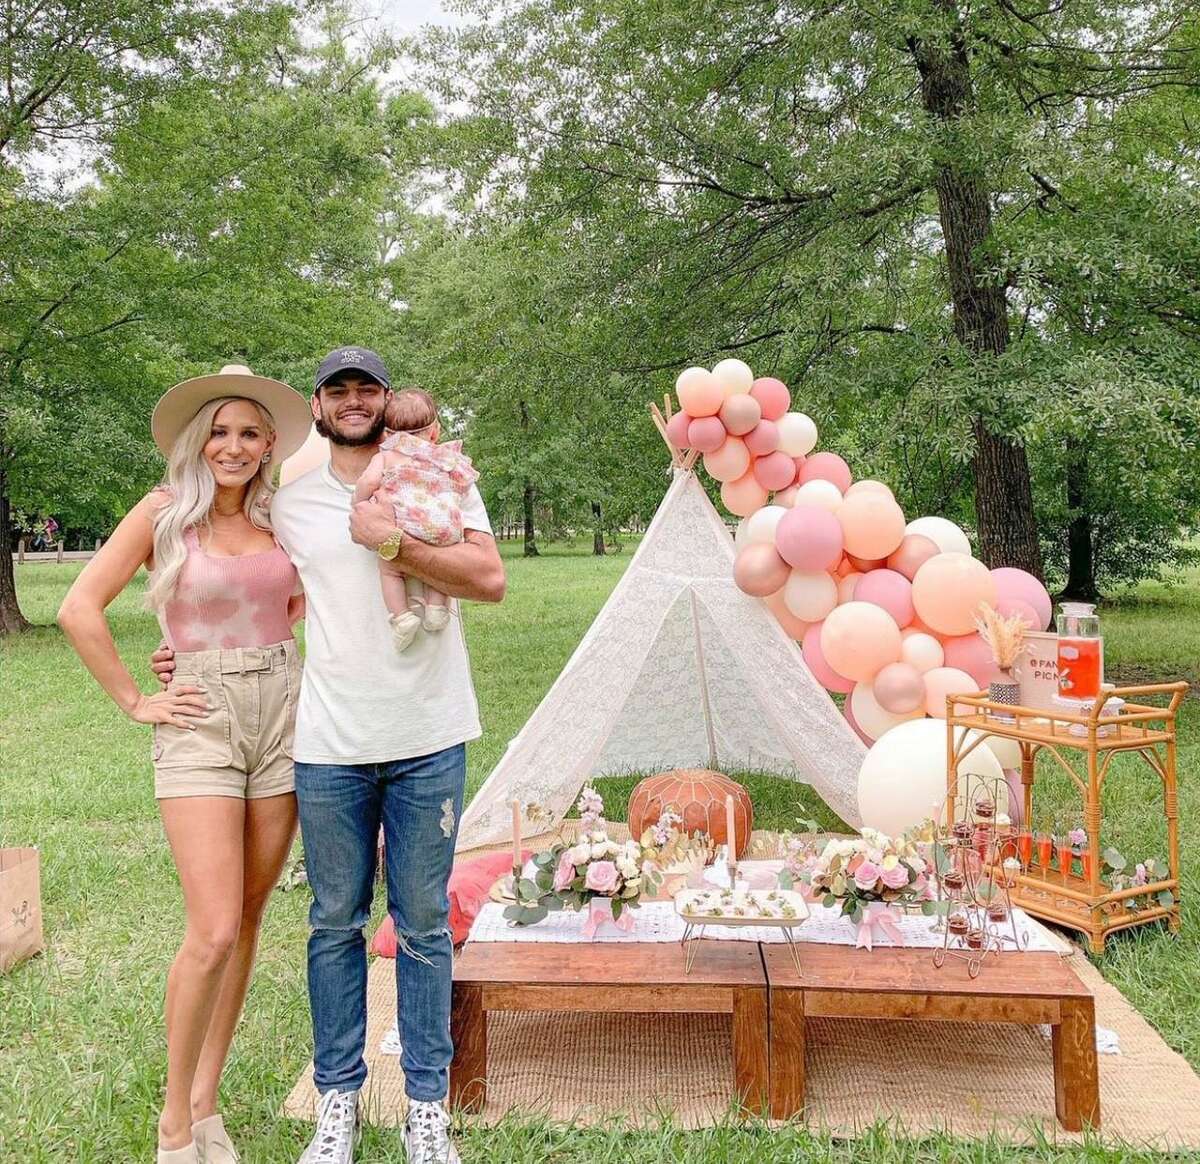 Kara and Lance McCullers are clients of Fancy Picnics, the business that Brenda Vilchis launched on Instagram at age 22 while a sophomore studying hospitality management at the University of Houston.